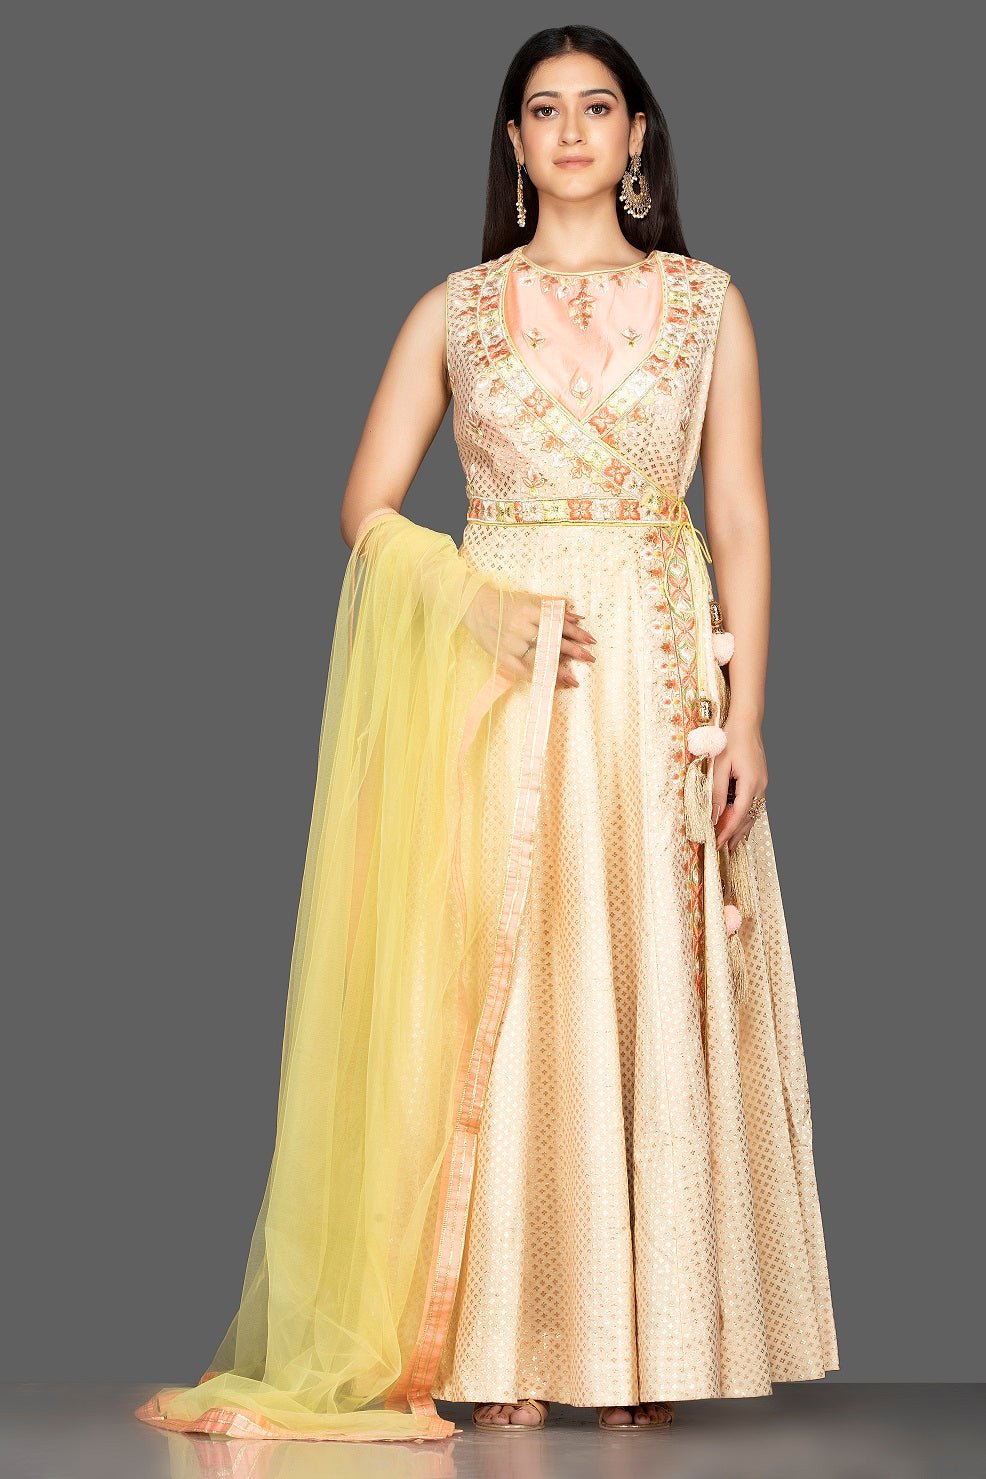 Buy beautiful cream embroidered Banarasi cotton Anarkali suit online in USA with yellow dupatta. Spread ethnic elegance on weddings and special occasions in splendid designer lehengas, Anarkali suits crafted with exquisite Indian craftsmanship from Pure Elegance Indian fashion store in USA.-full view